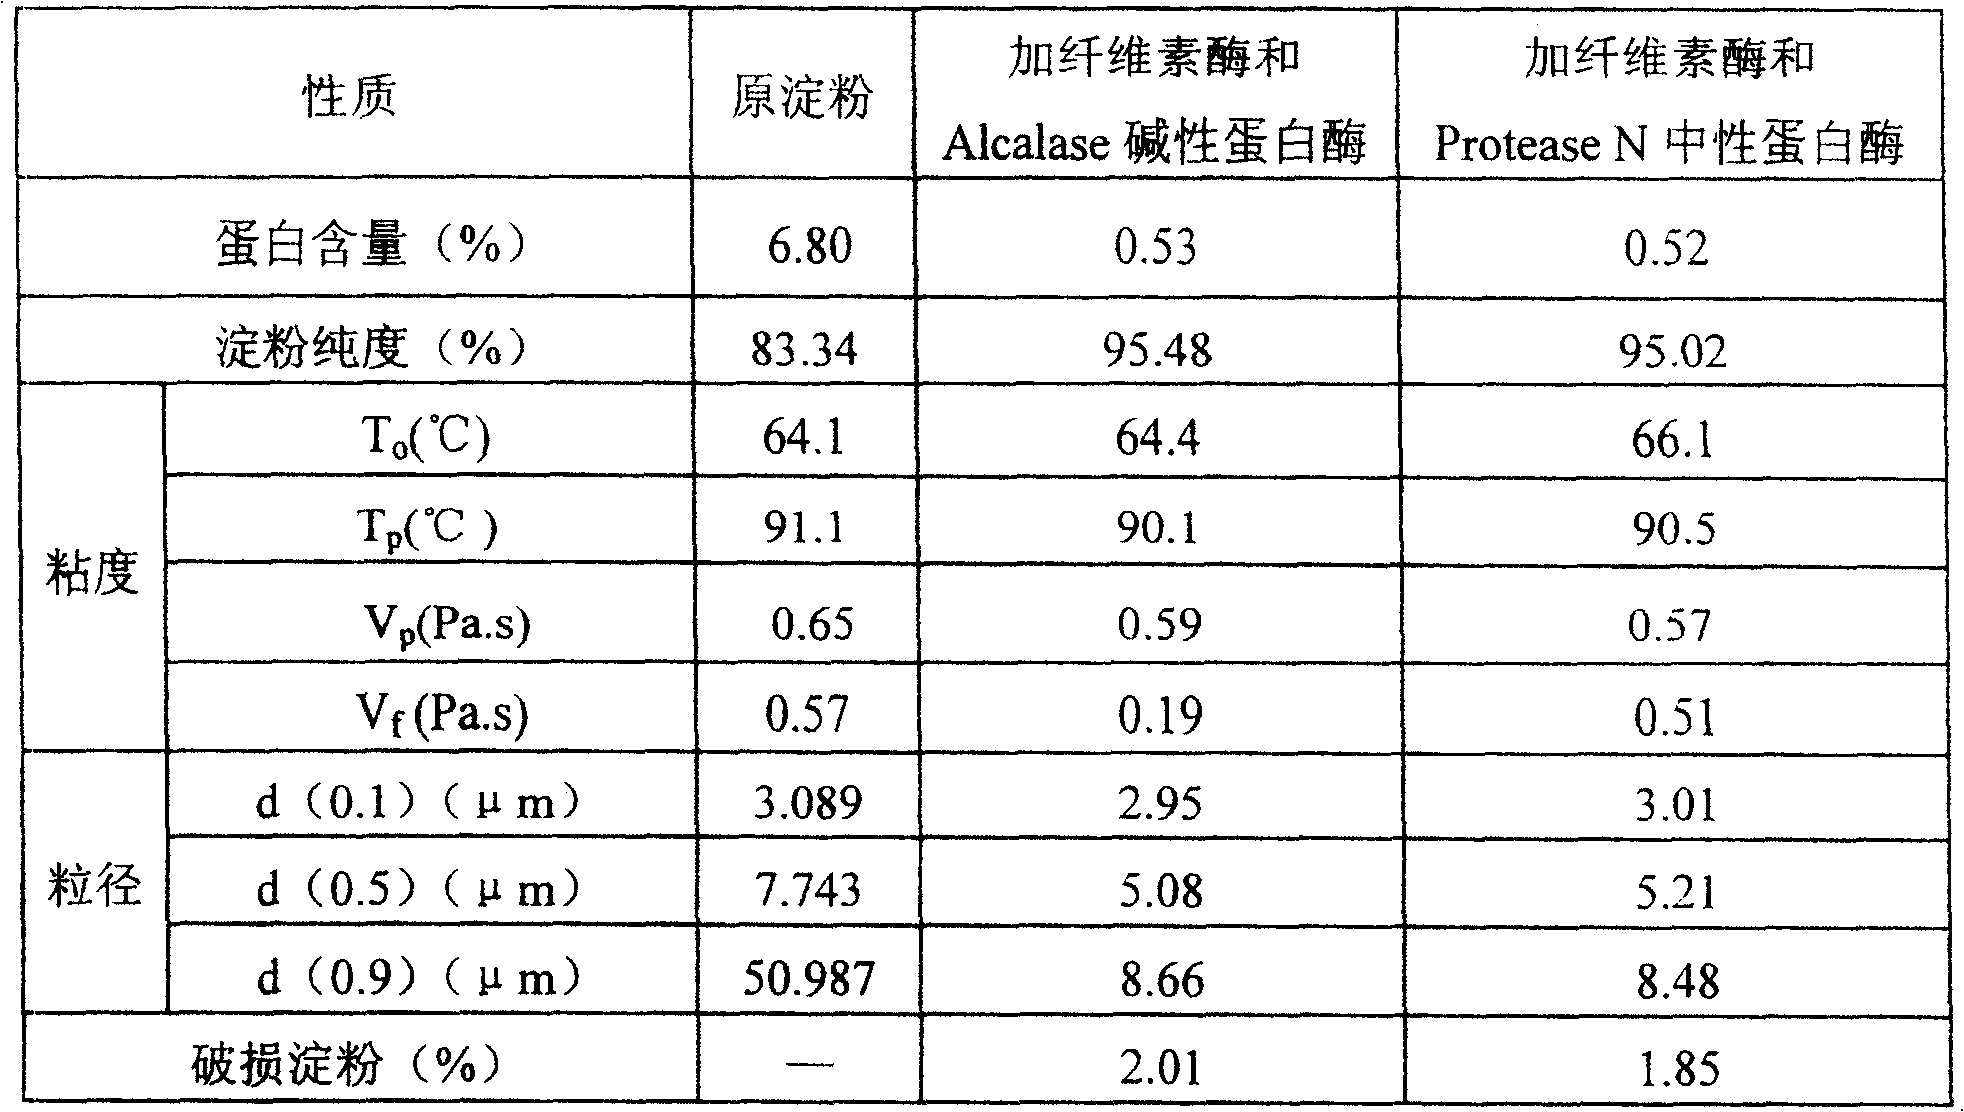 Method for hydrolyzing, separating and preparing rice starch and rice peptide using enzyme method